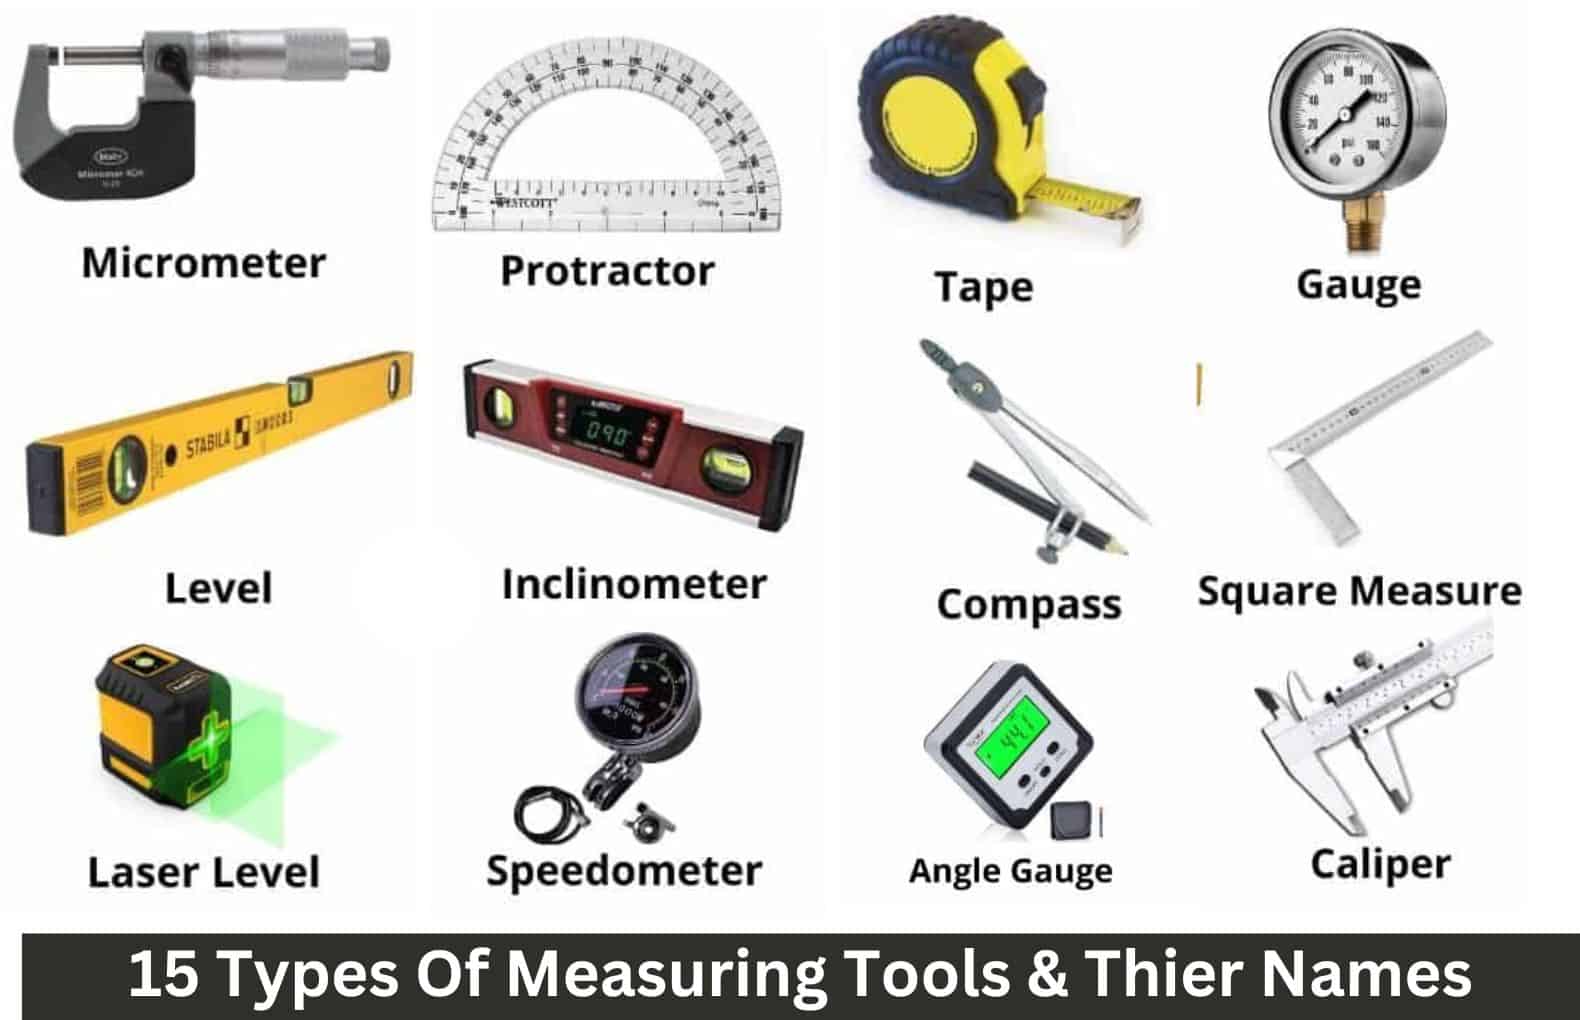 10 Cutting Tools for Crafters